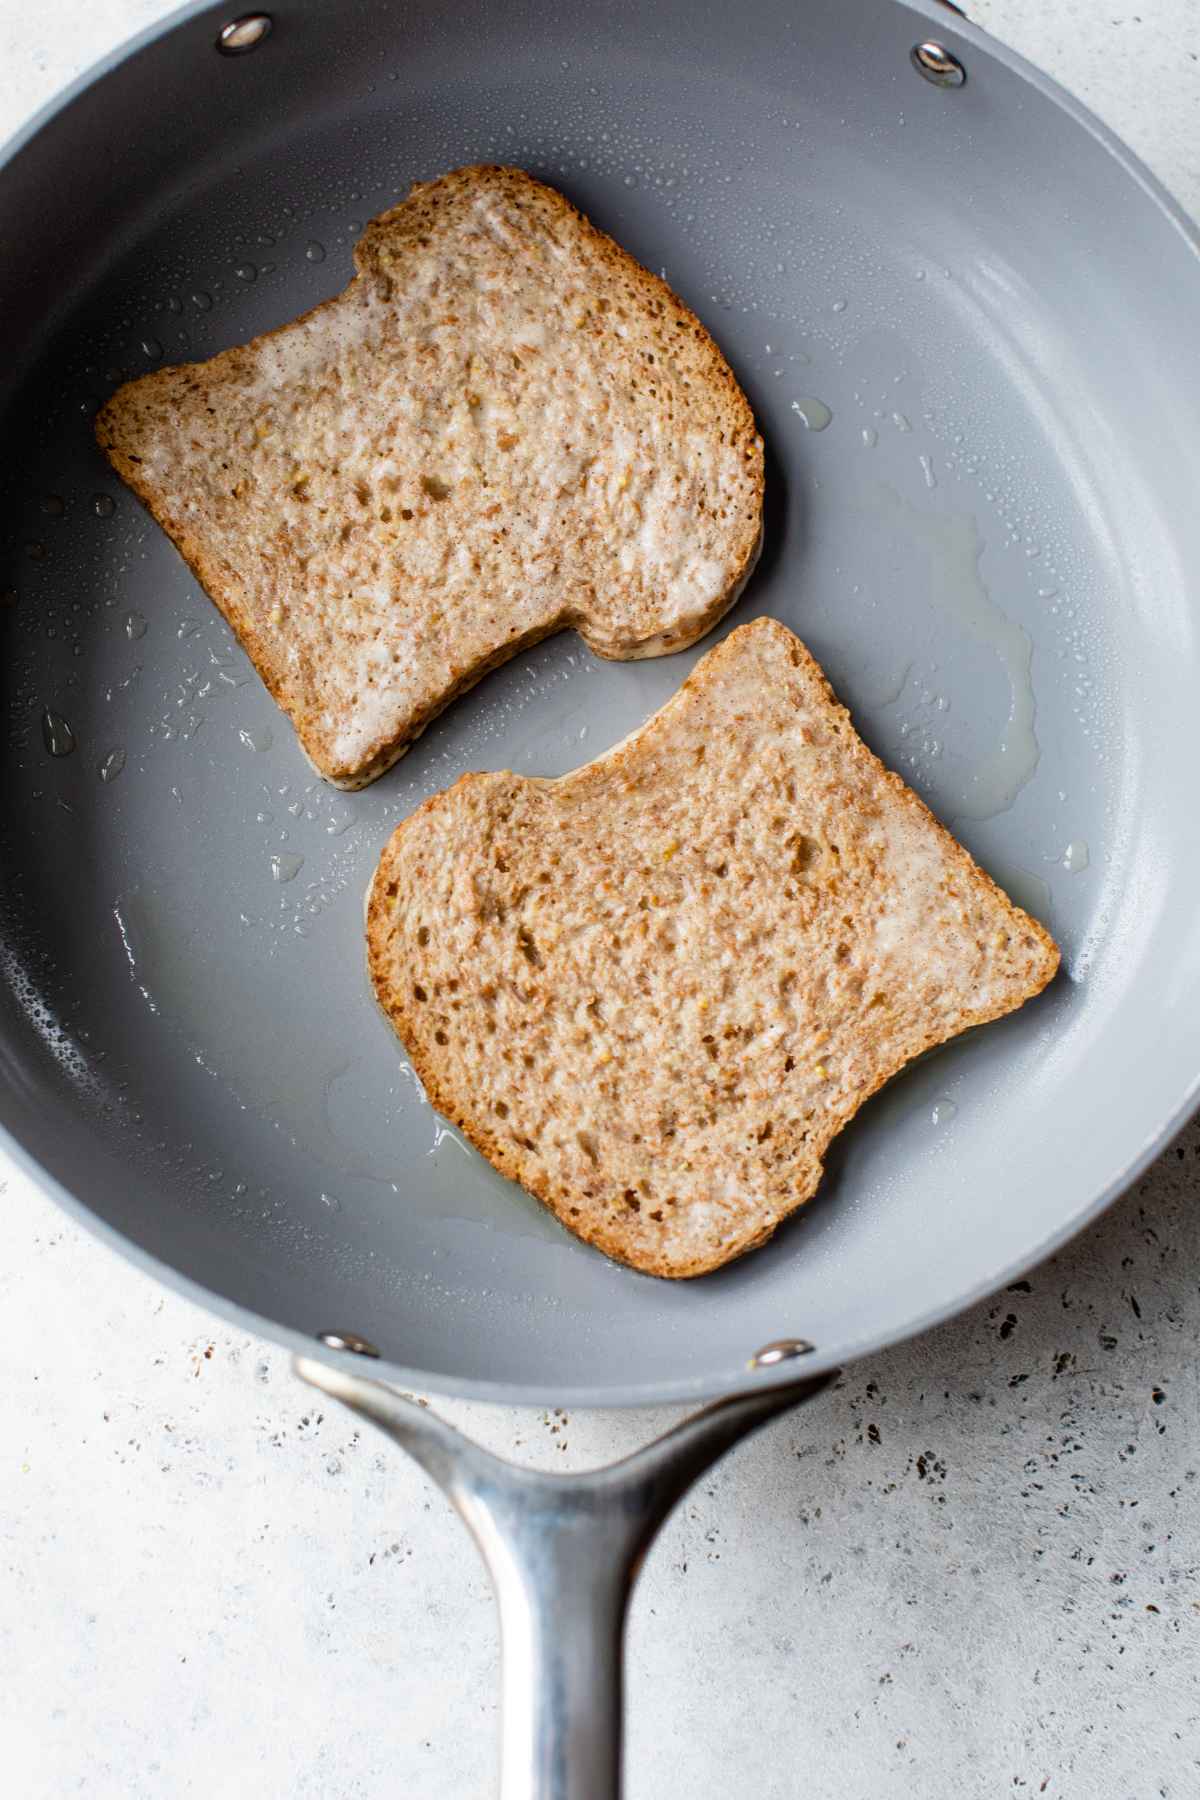 Cooking slices of bread in a pan.